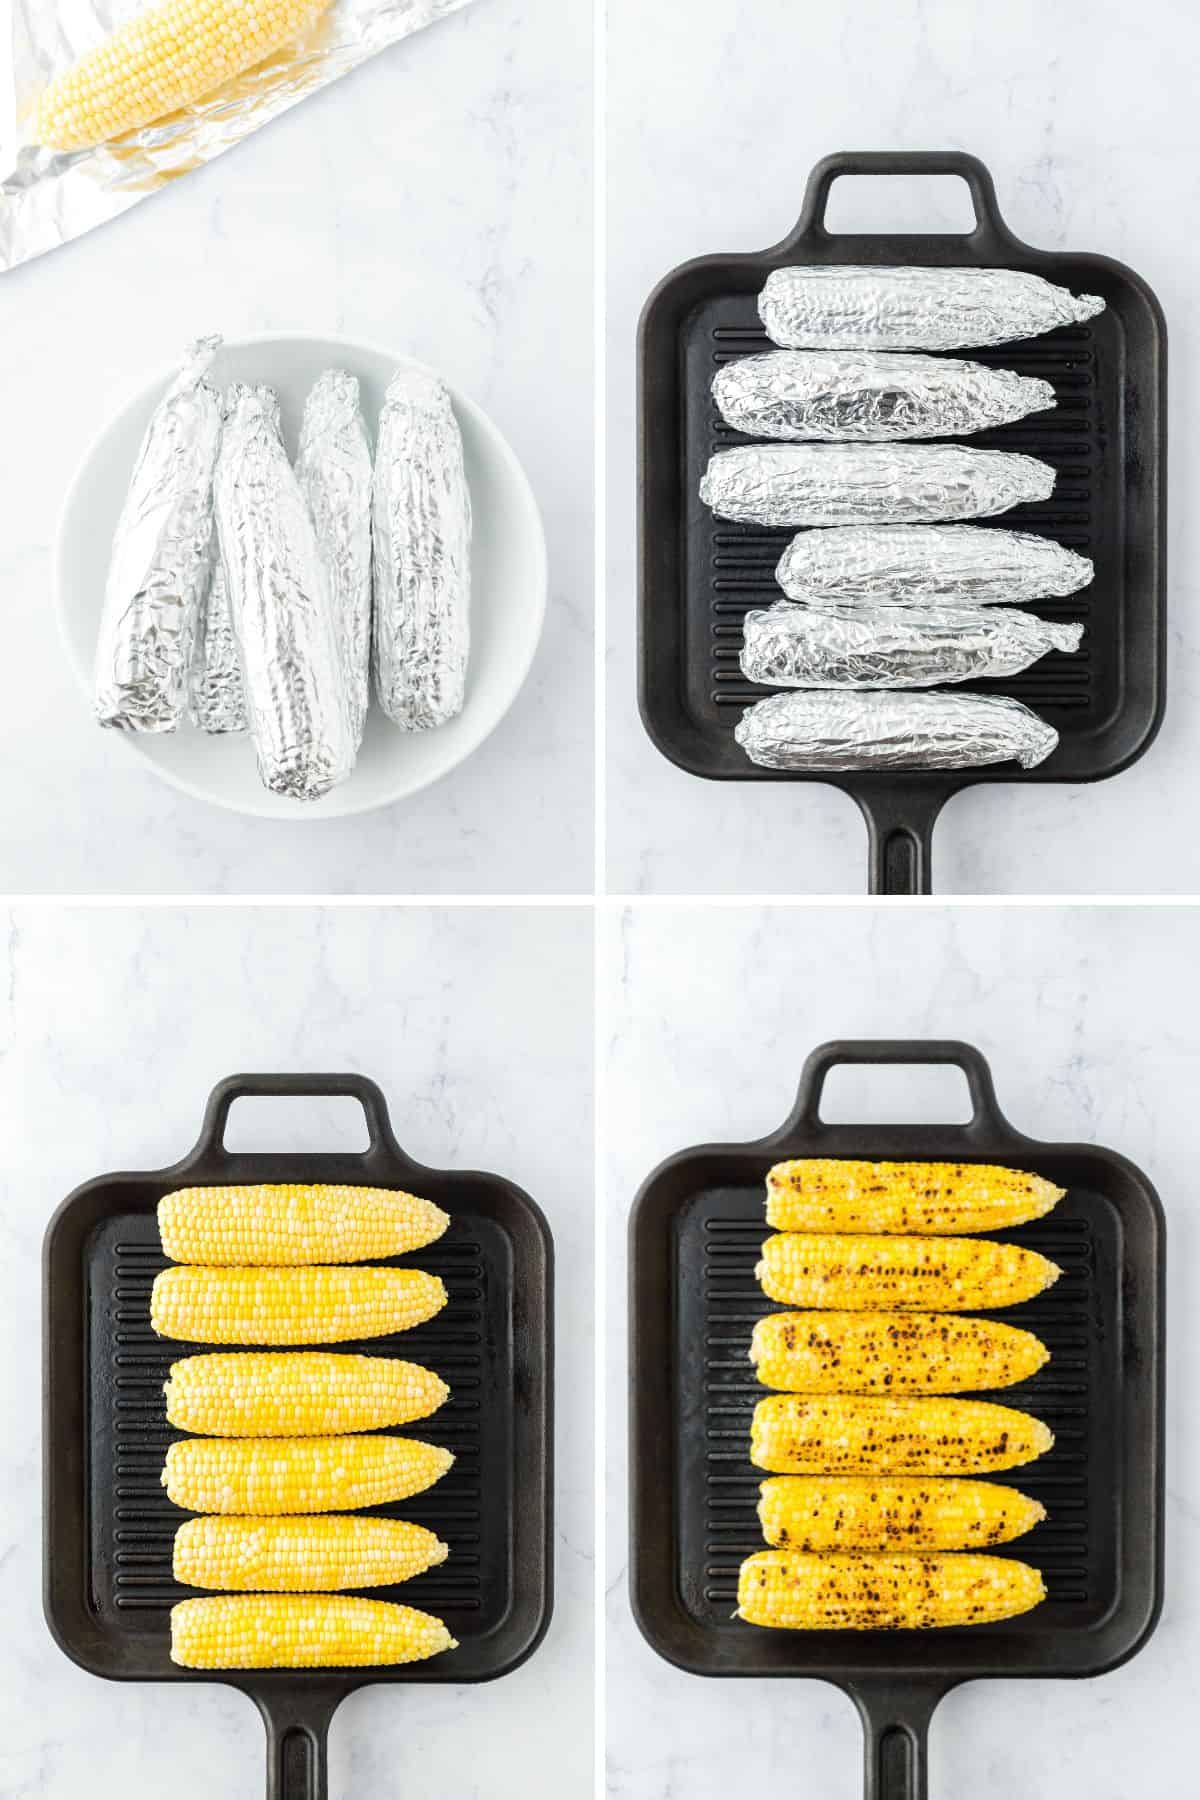 A collage showing corn wrapped in foil, on a grill pan, unwrapped on the pan, on the pan with browned kernels.